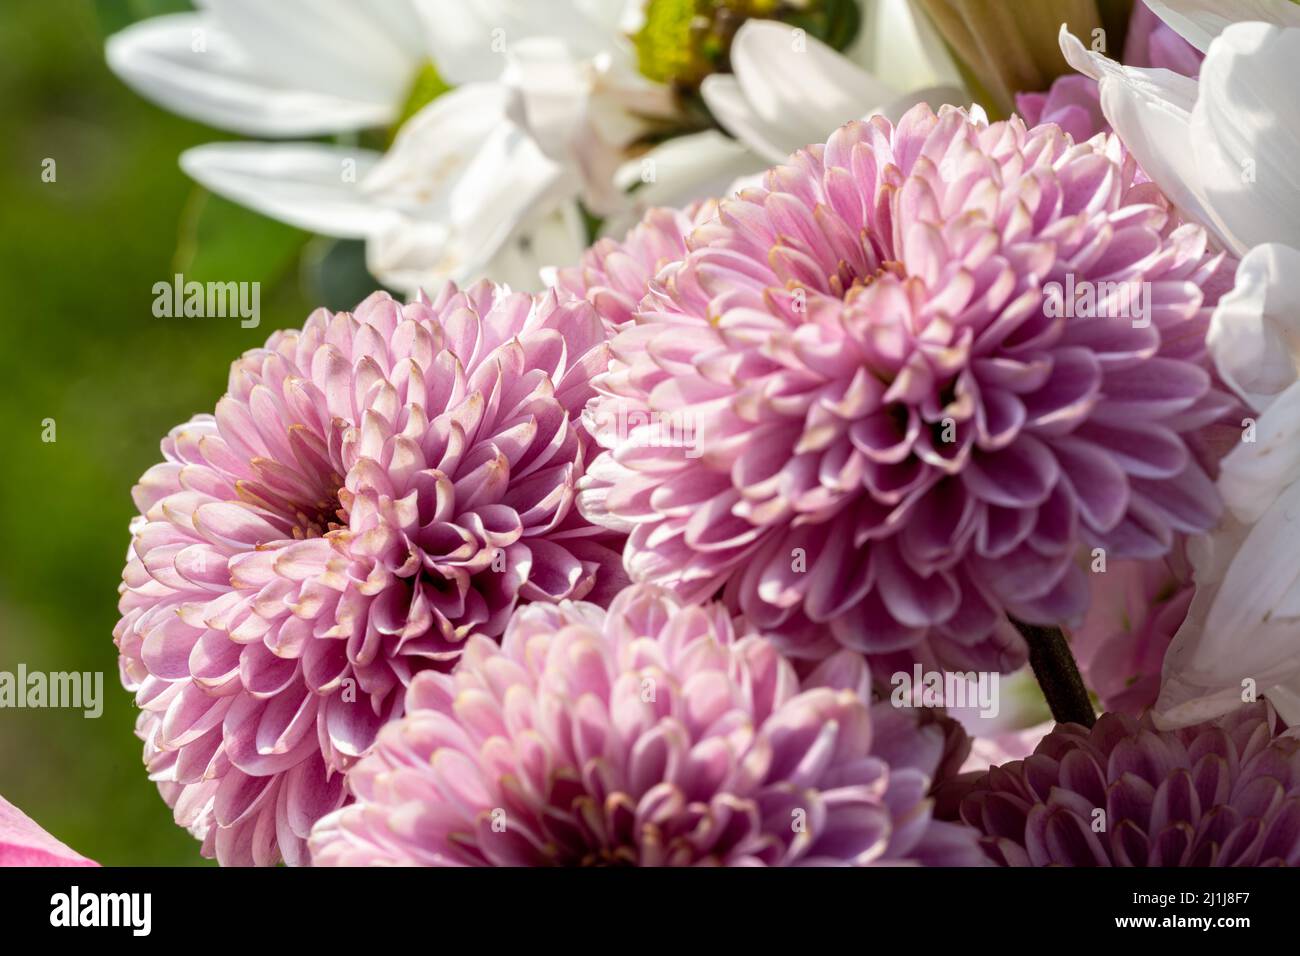 Pink Chrysanthemum flowers in bloom with a shallow depth of field. Stock Photo